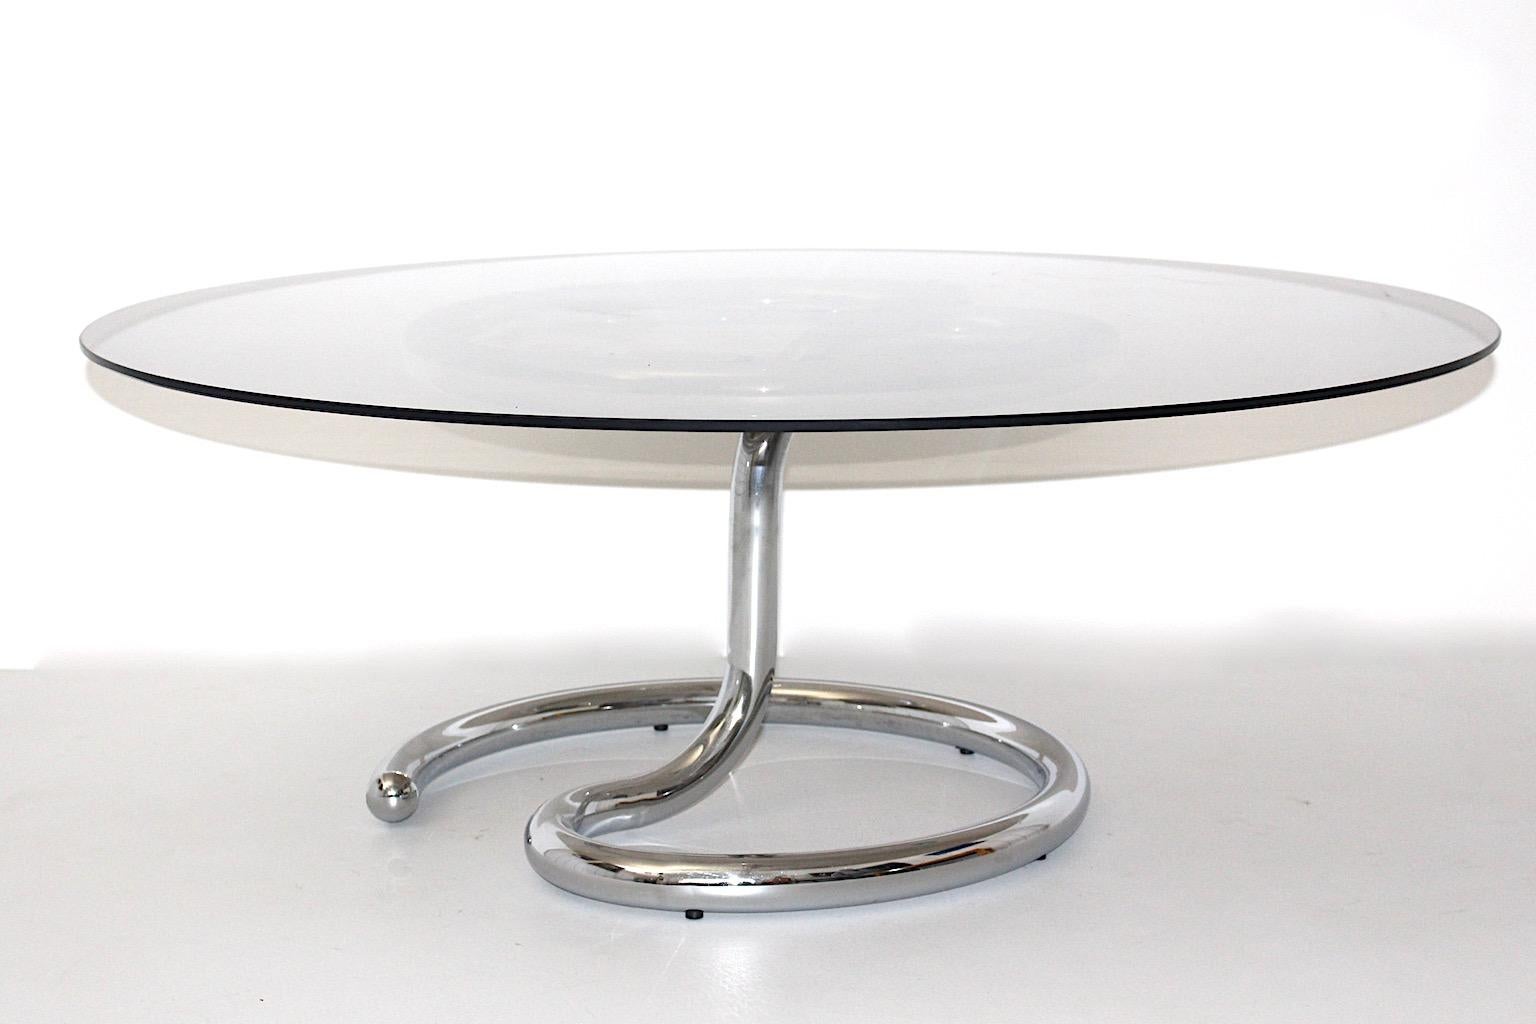 Space Age vintage coffee table from chromed metal and smoked glass 1970s Germany.
While the chromed metal base shows a beautiful curved construction, the smoked glass top features round shape.
Very good condition with signs of age and